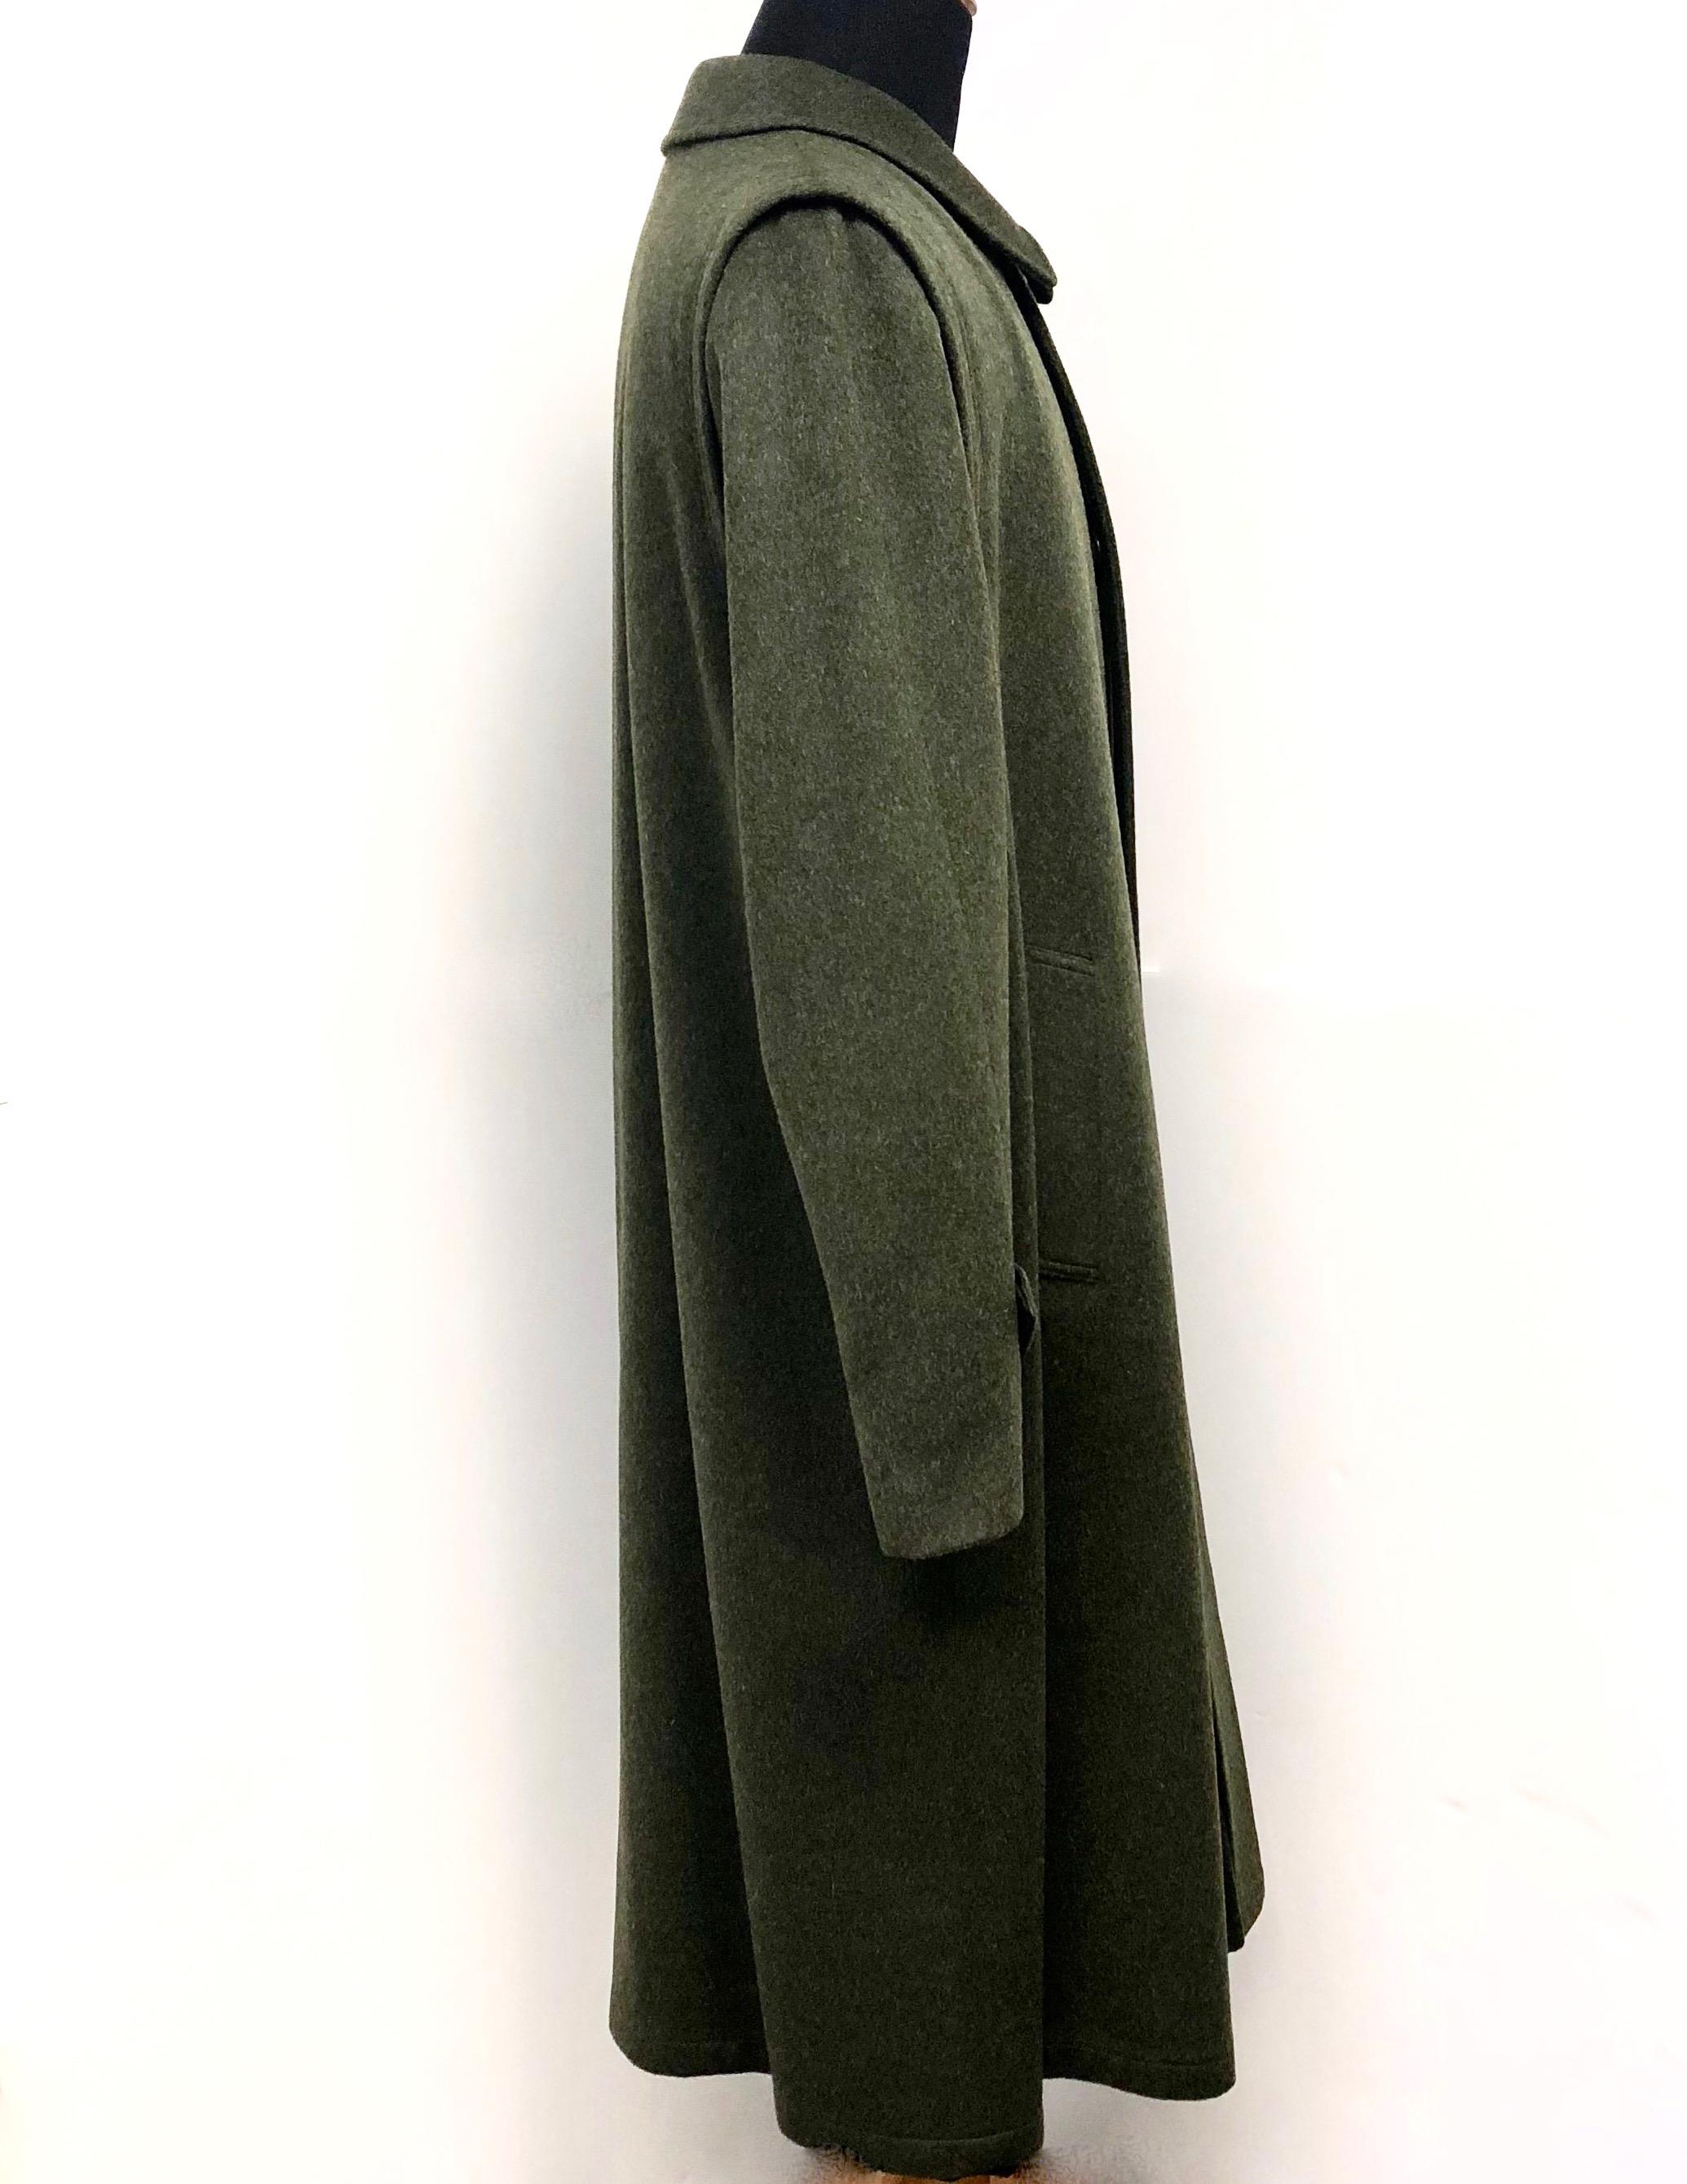 Vintage 1990's Aquascutum Hunter Green Wool Men's Trench Coat

Over 150 years of fine craftsmanship, luxurious tailoring, and an attention to details qualifies this British label as a prime example of enduring tradition. It's understated elegance